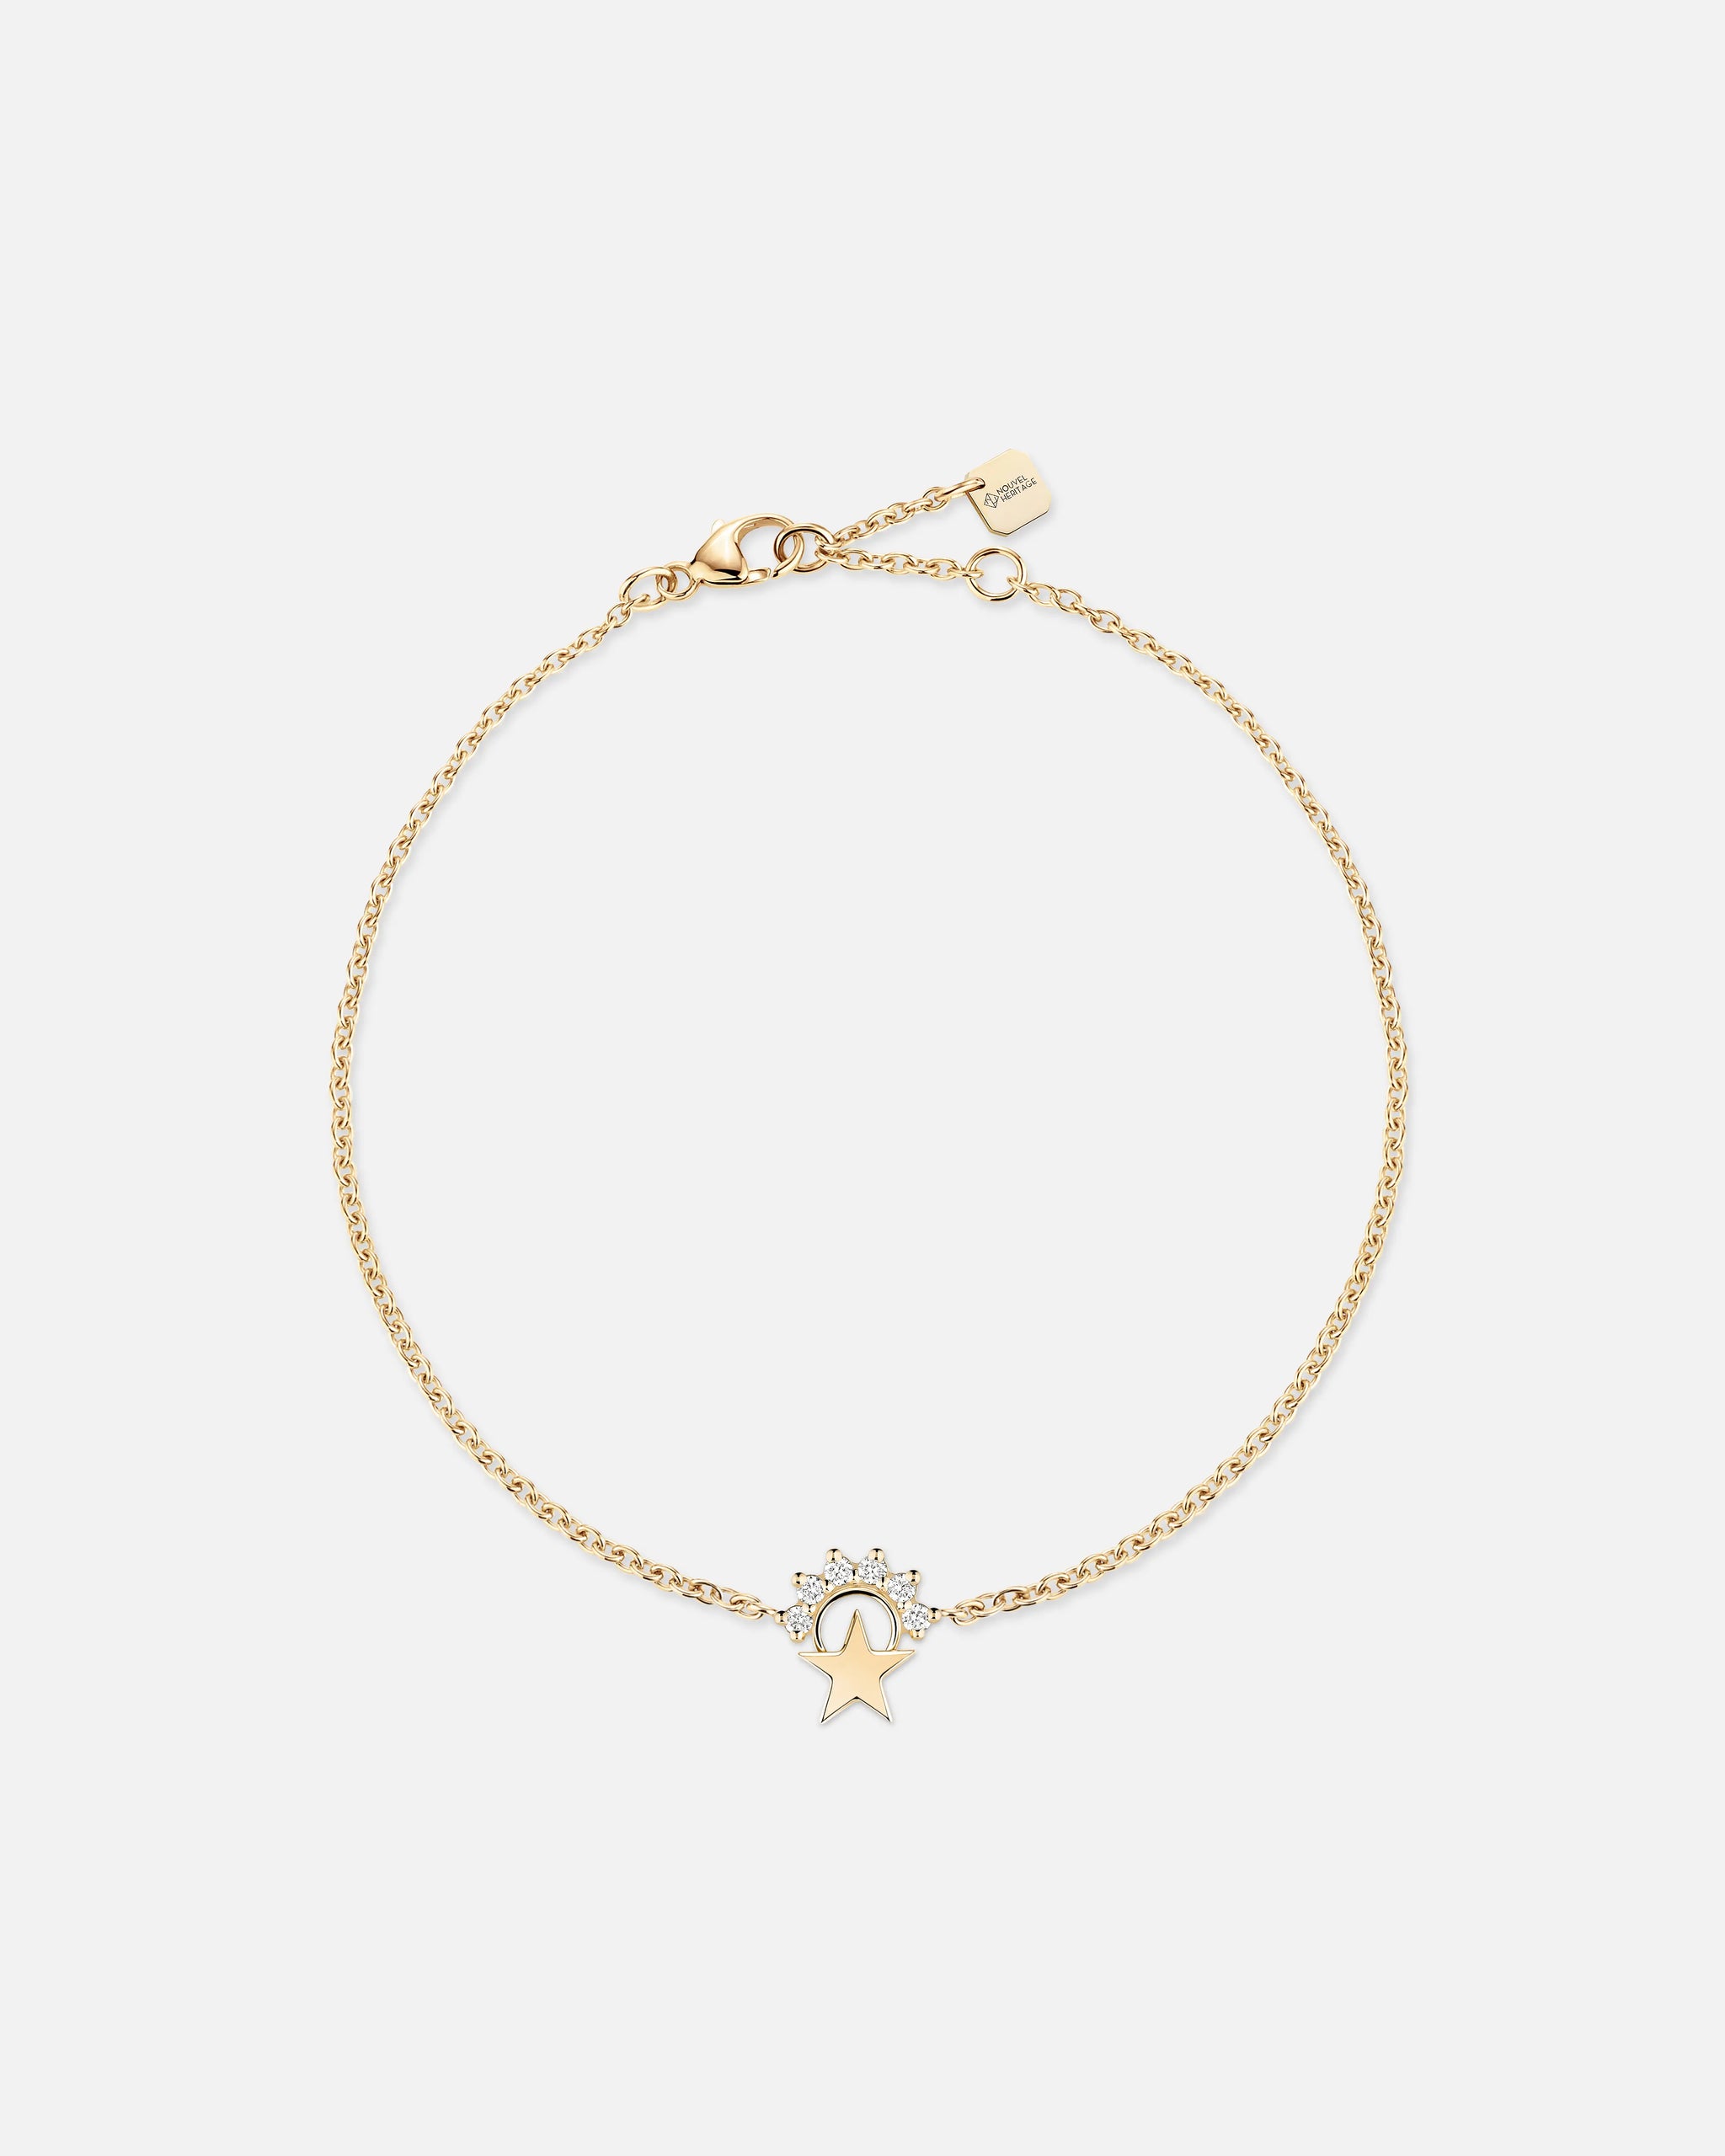 Small Star Bracelet in Yellow Gold - 1 - Nouvel Heritage